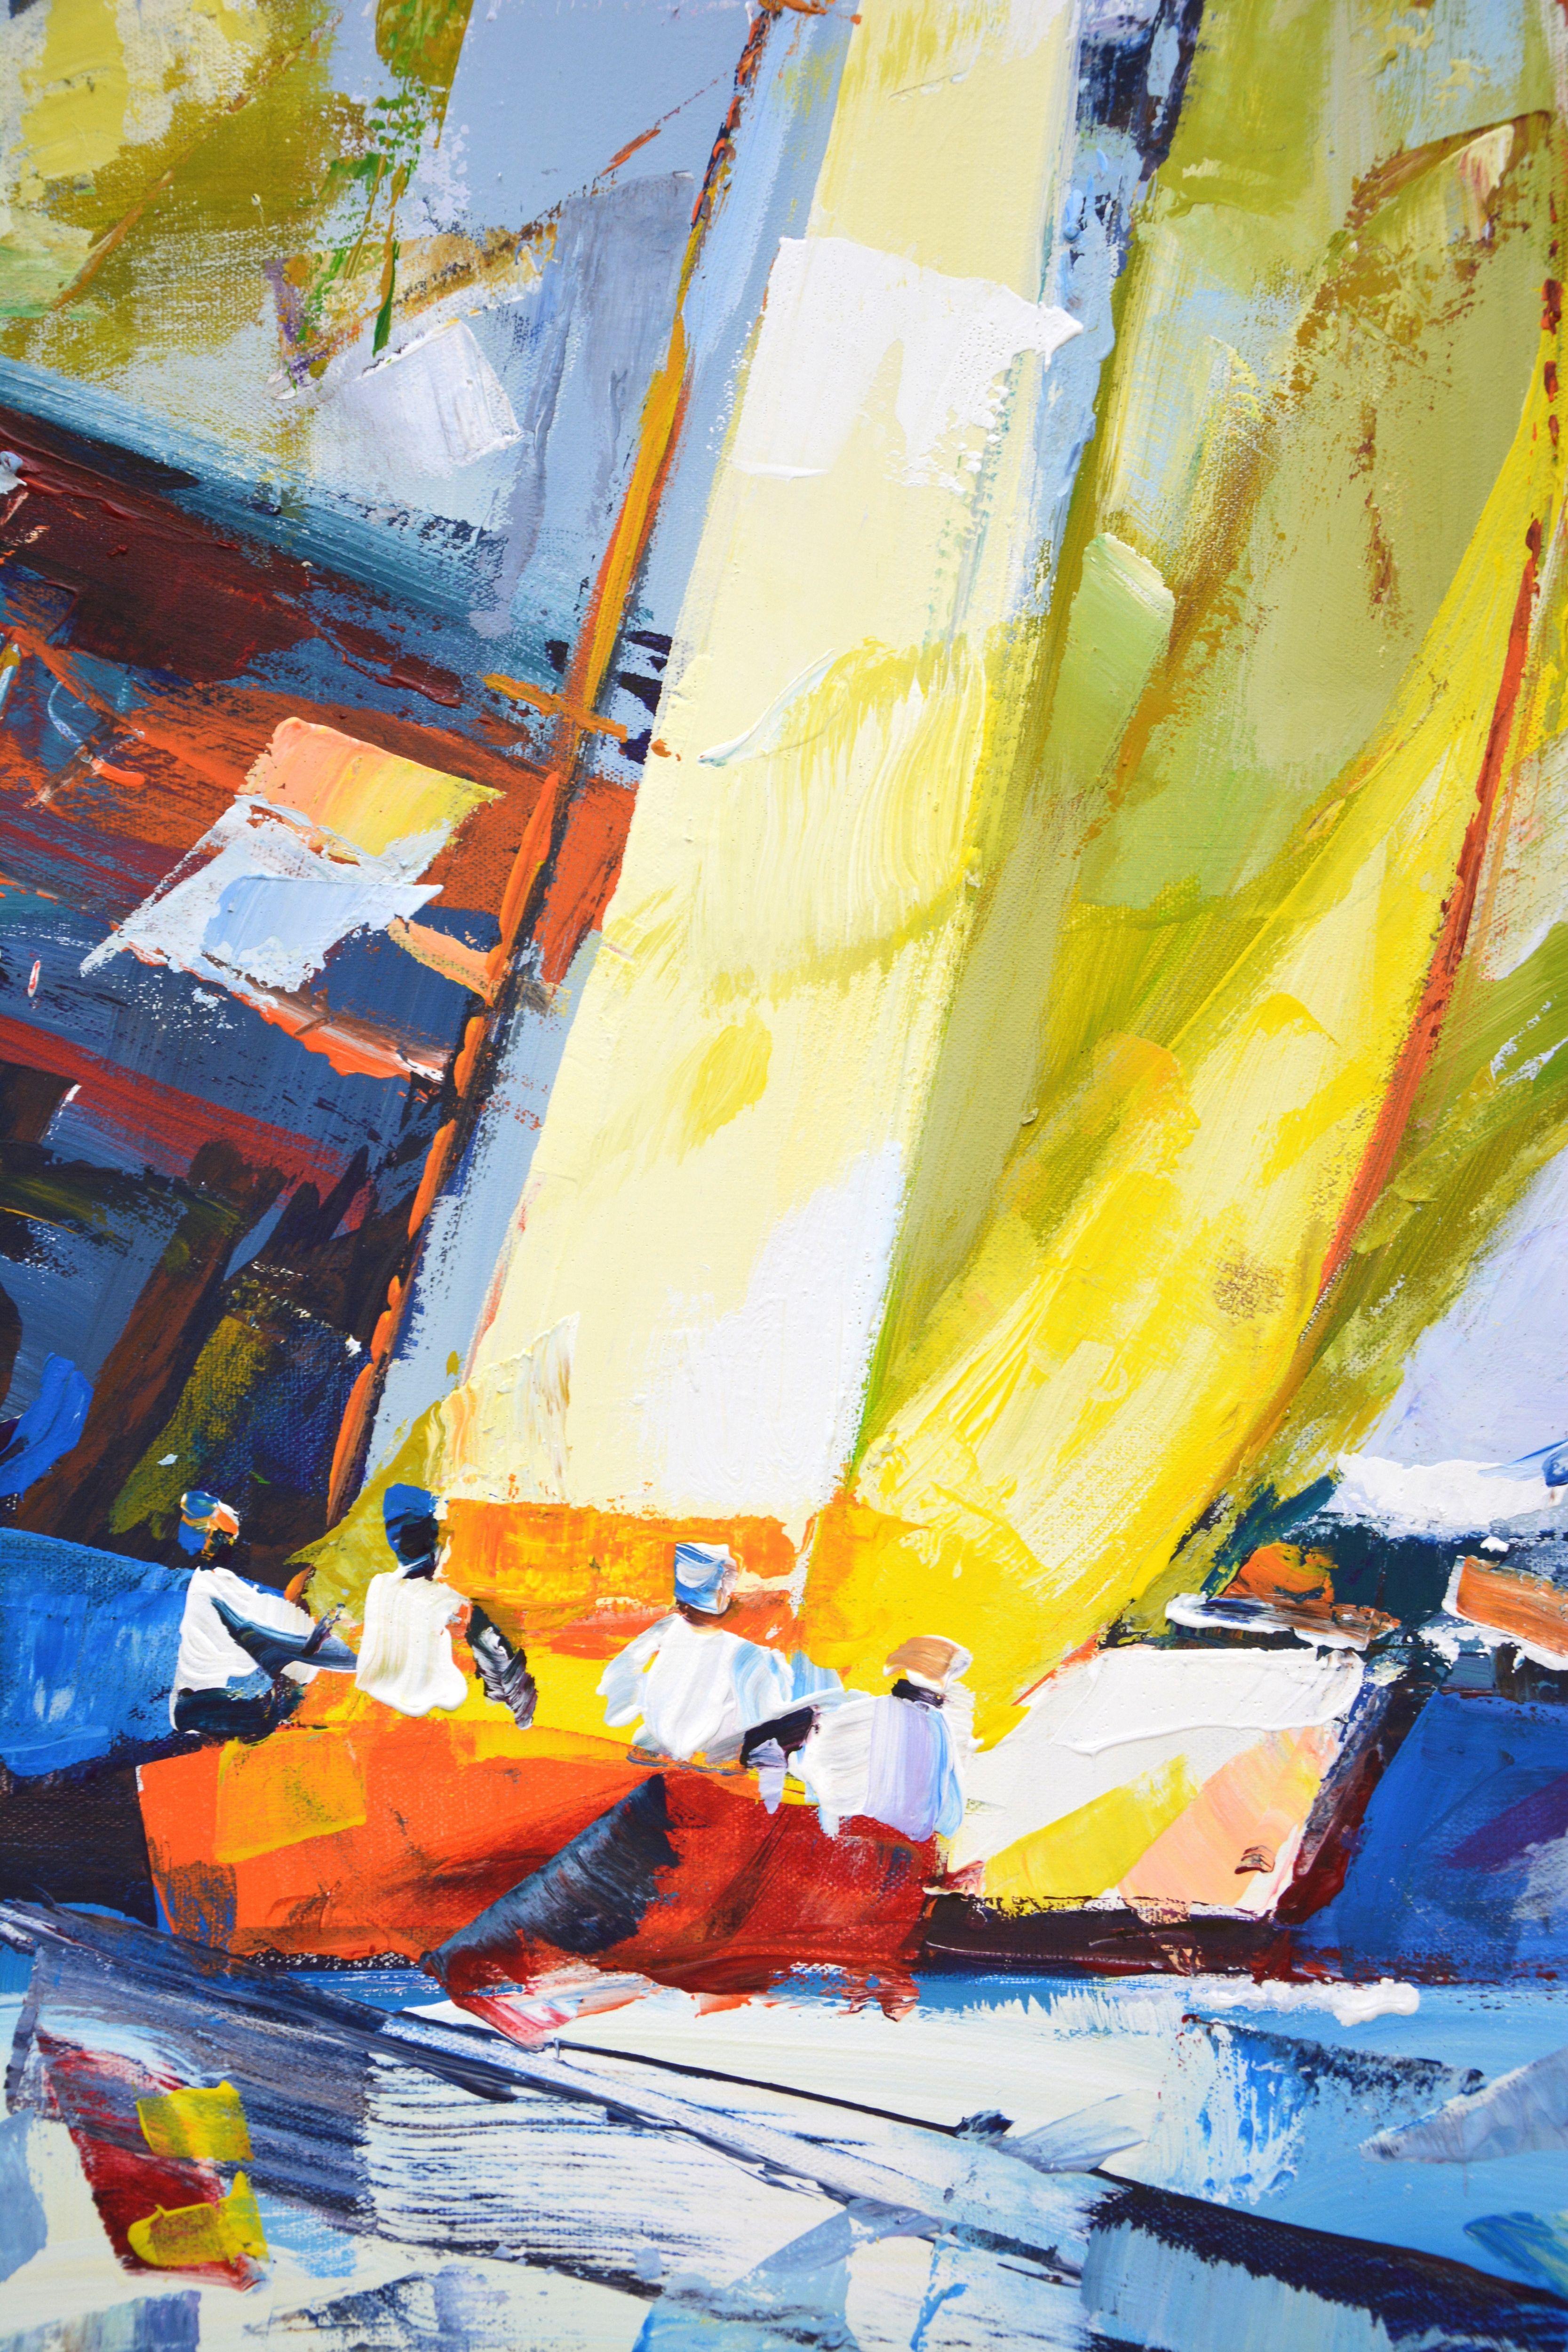 Regatta 35. Yachts with sail on an abstract gray background. Abstraction. Abstract expressionism. Contemporary. The palette vigorously mixes the colors of blue, gray and white, small accents of yellow, red of a certain shape, scattered across the